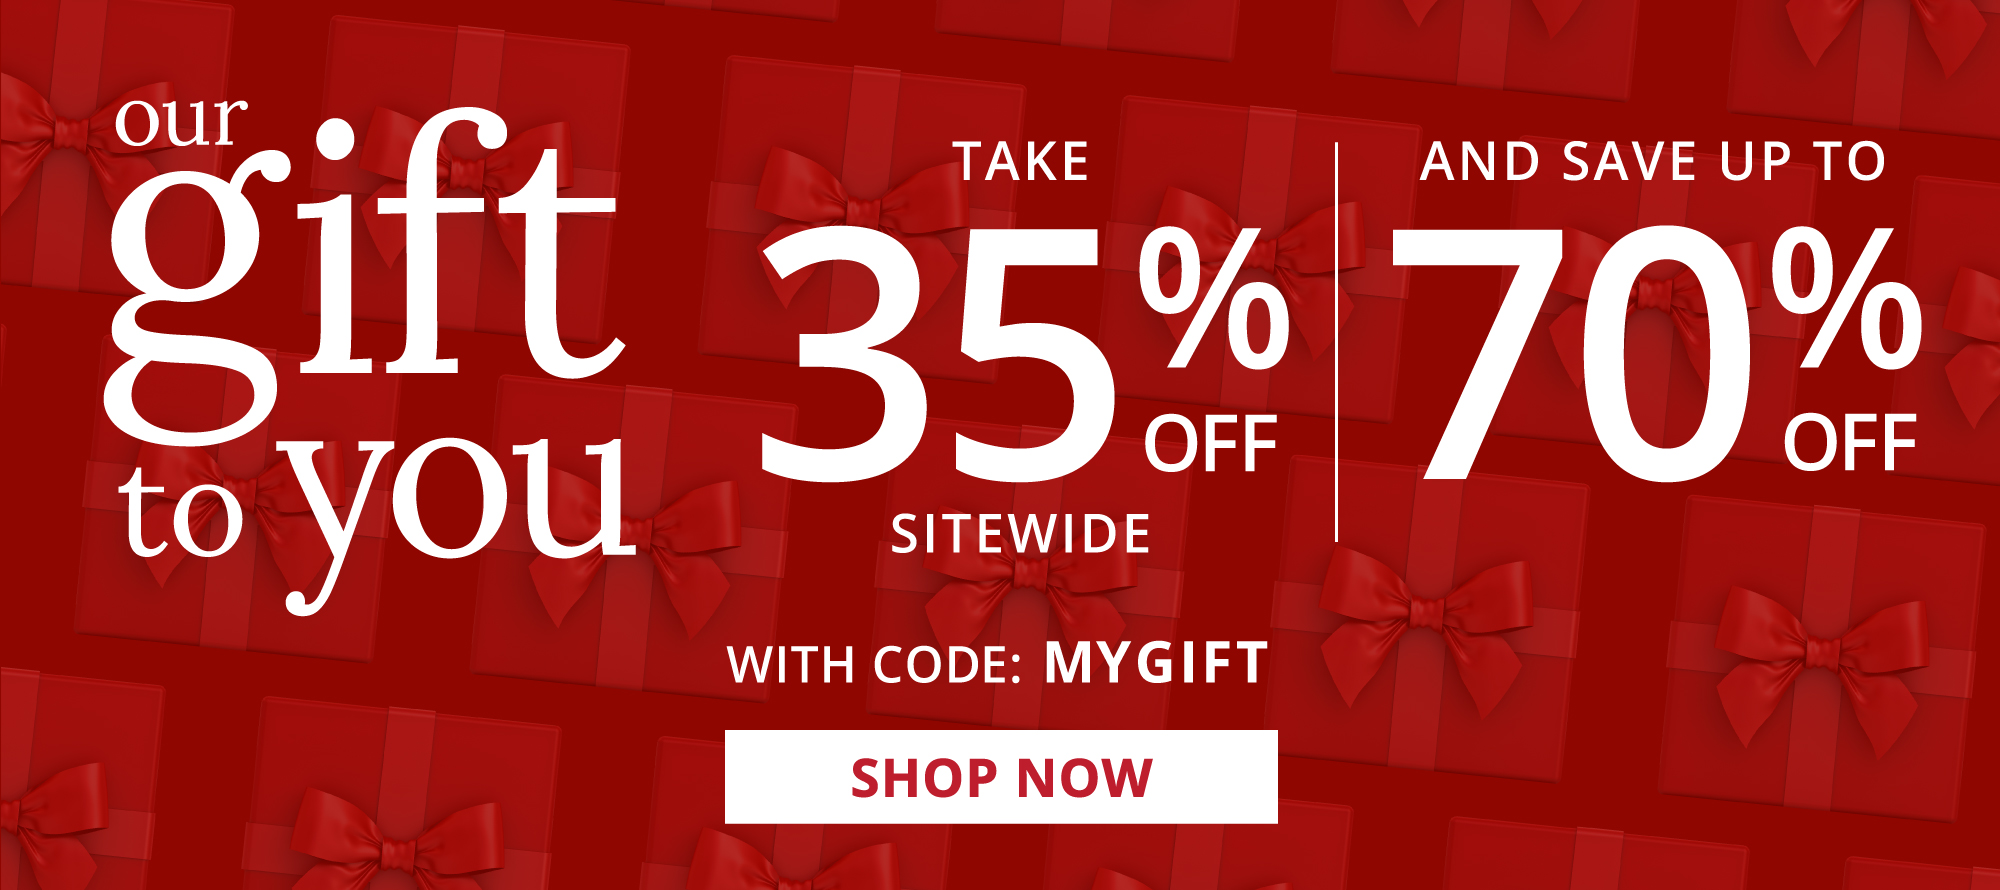 our . WITH CODE: MYGIFT AND SAVE UP TO 70% 